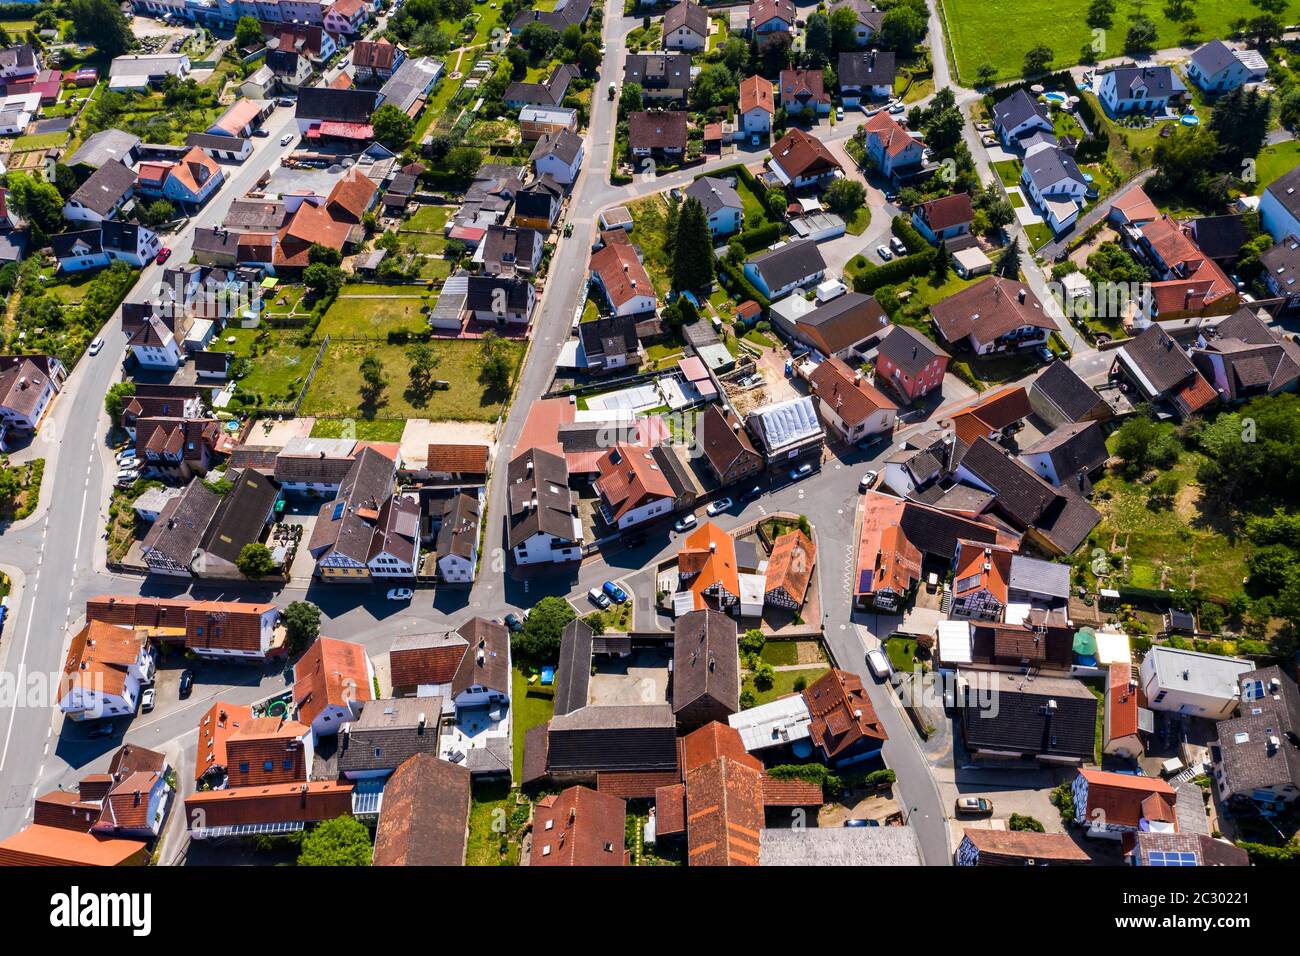 Aerial view, Hessian village, Fischbachtal, Hesse, Germany Stock Photo